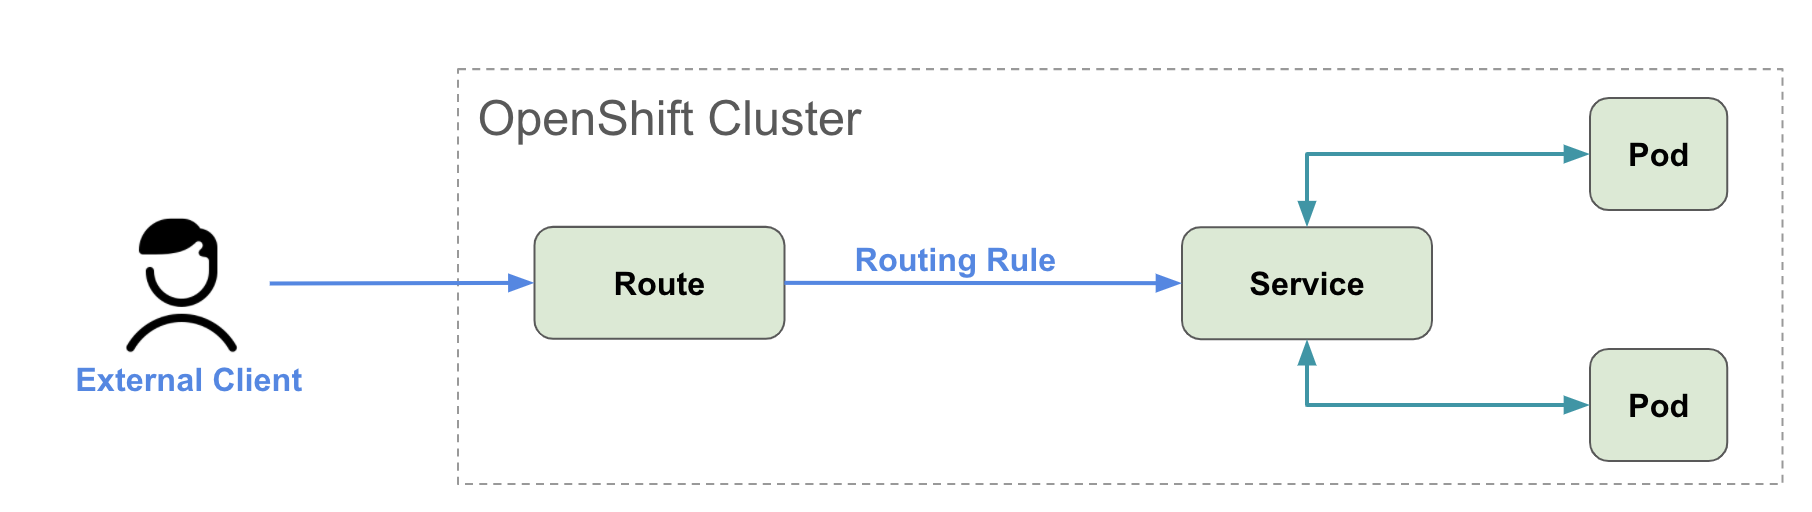 Routing service. OPENSHIFT. OPENSHIFT Route. Geo Route OPENSHIFT. OPENSHIFT pods.